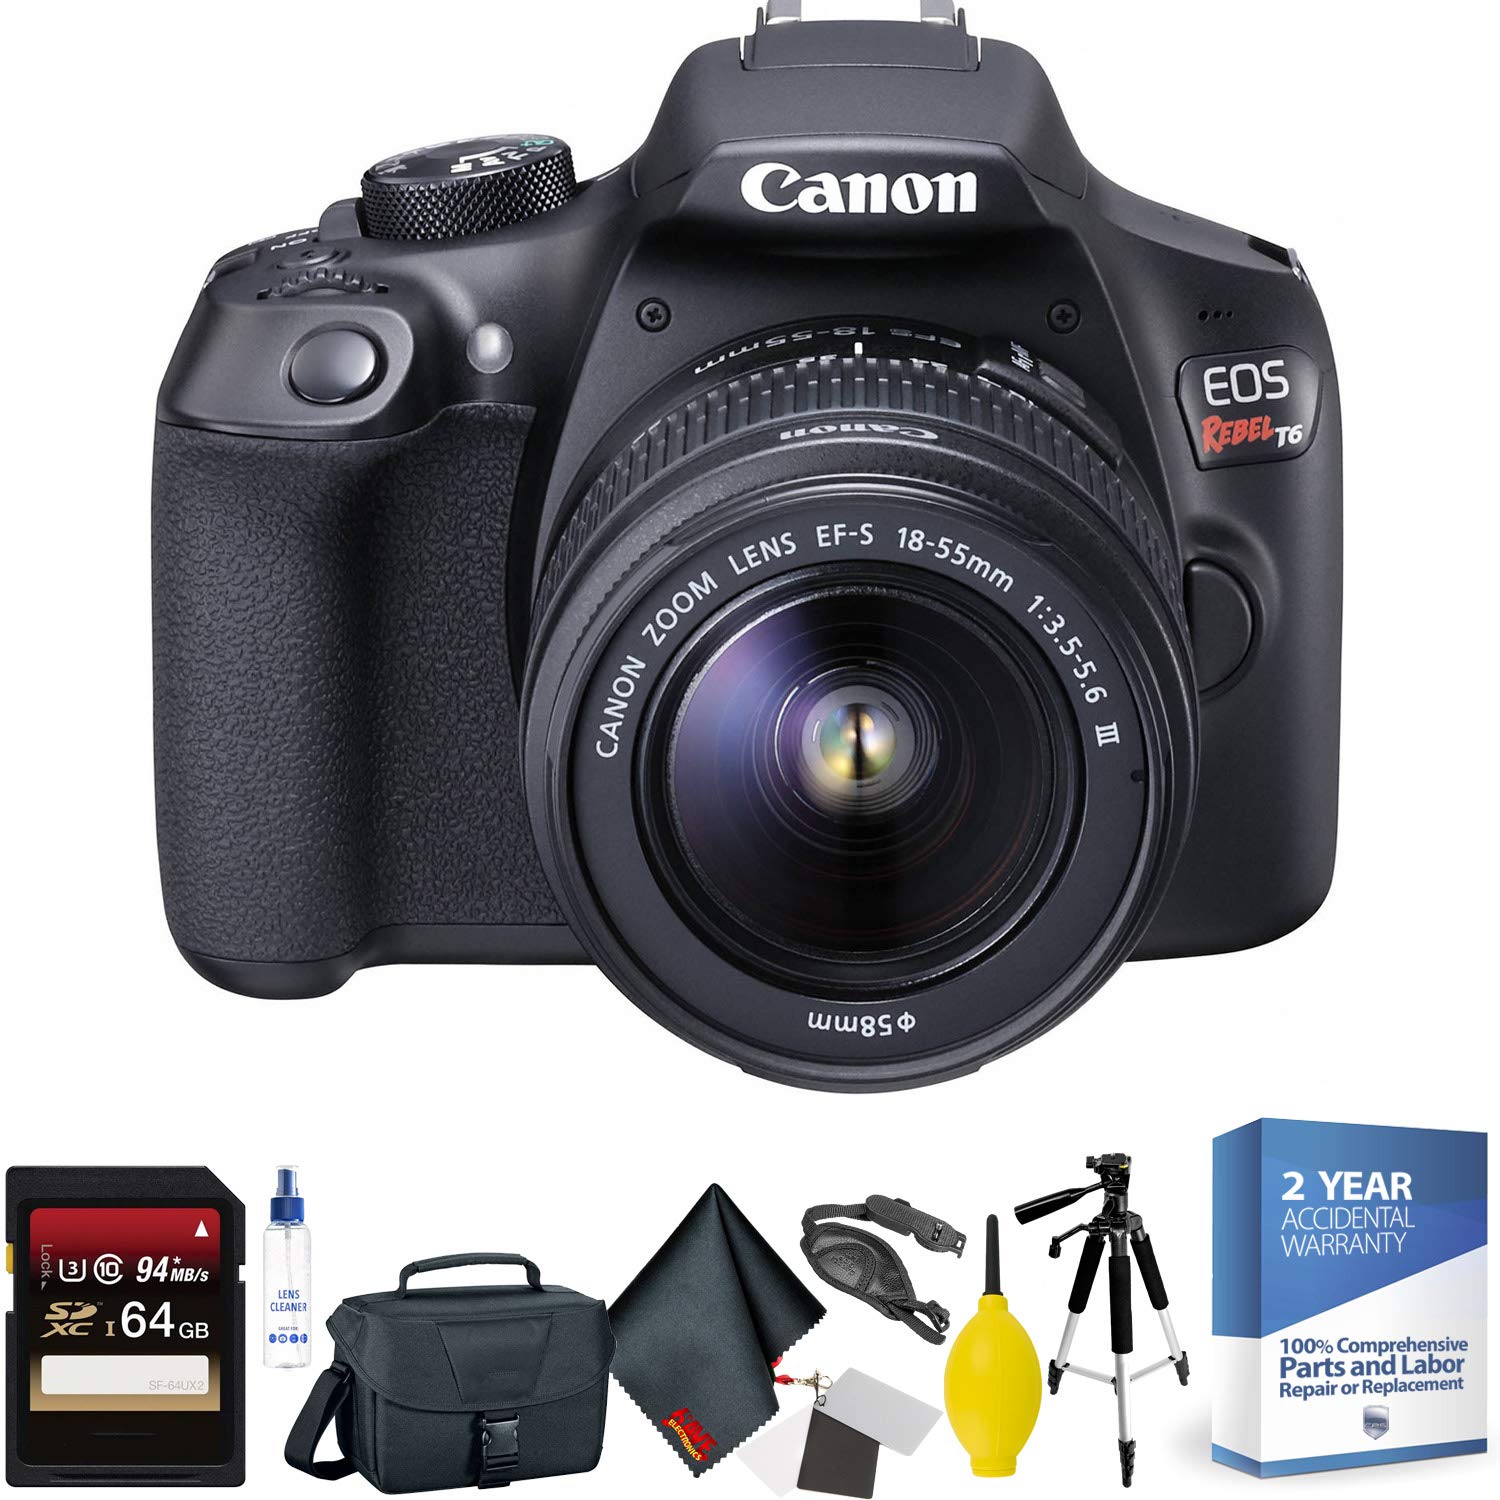 Canon EOS Rebel T6 DSLR Camera with 18-55mm and 75-300mm Lenses Kit + 64GB Memory Card + Mega Accessory Kit + 2 Year Accidental Warranty Bundle